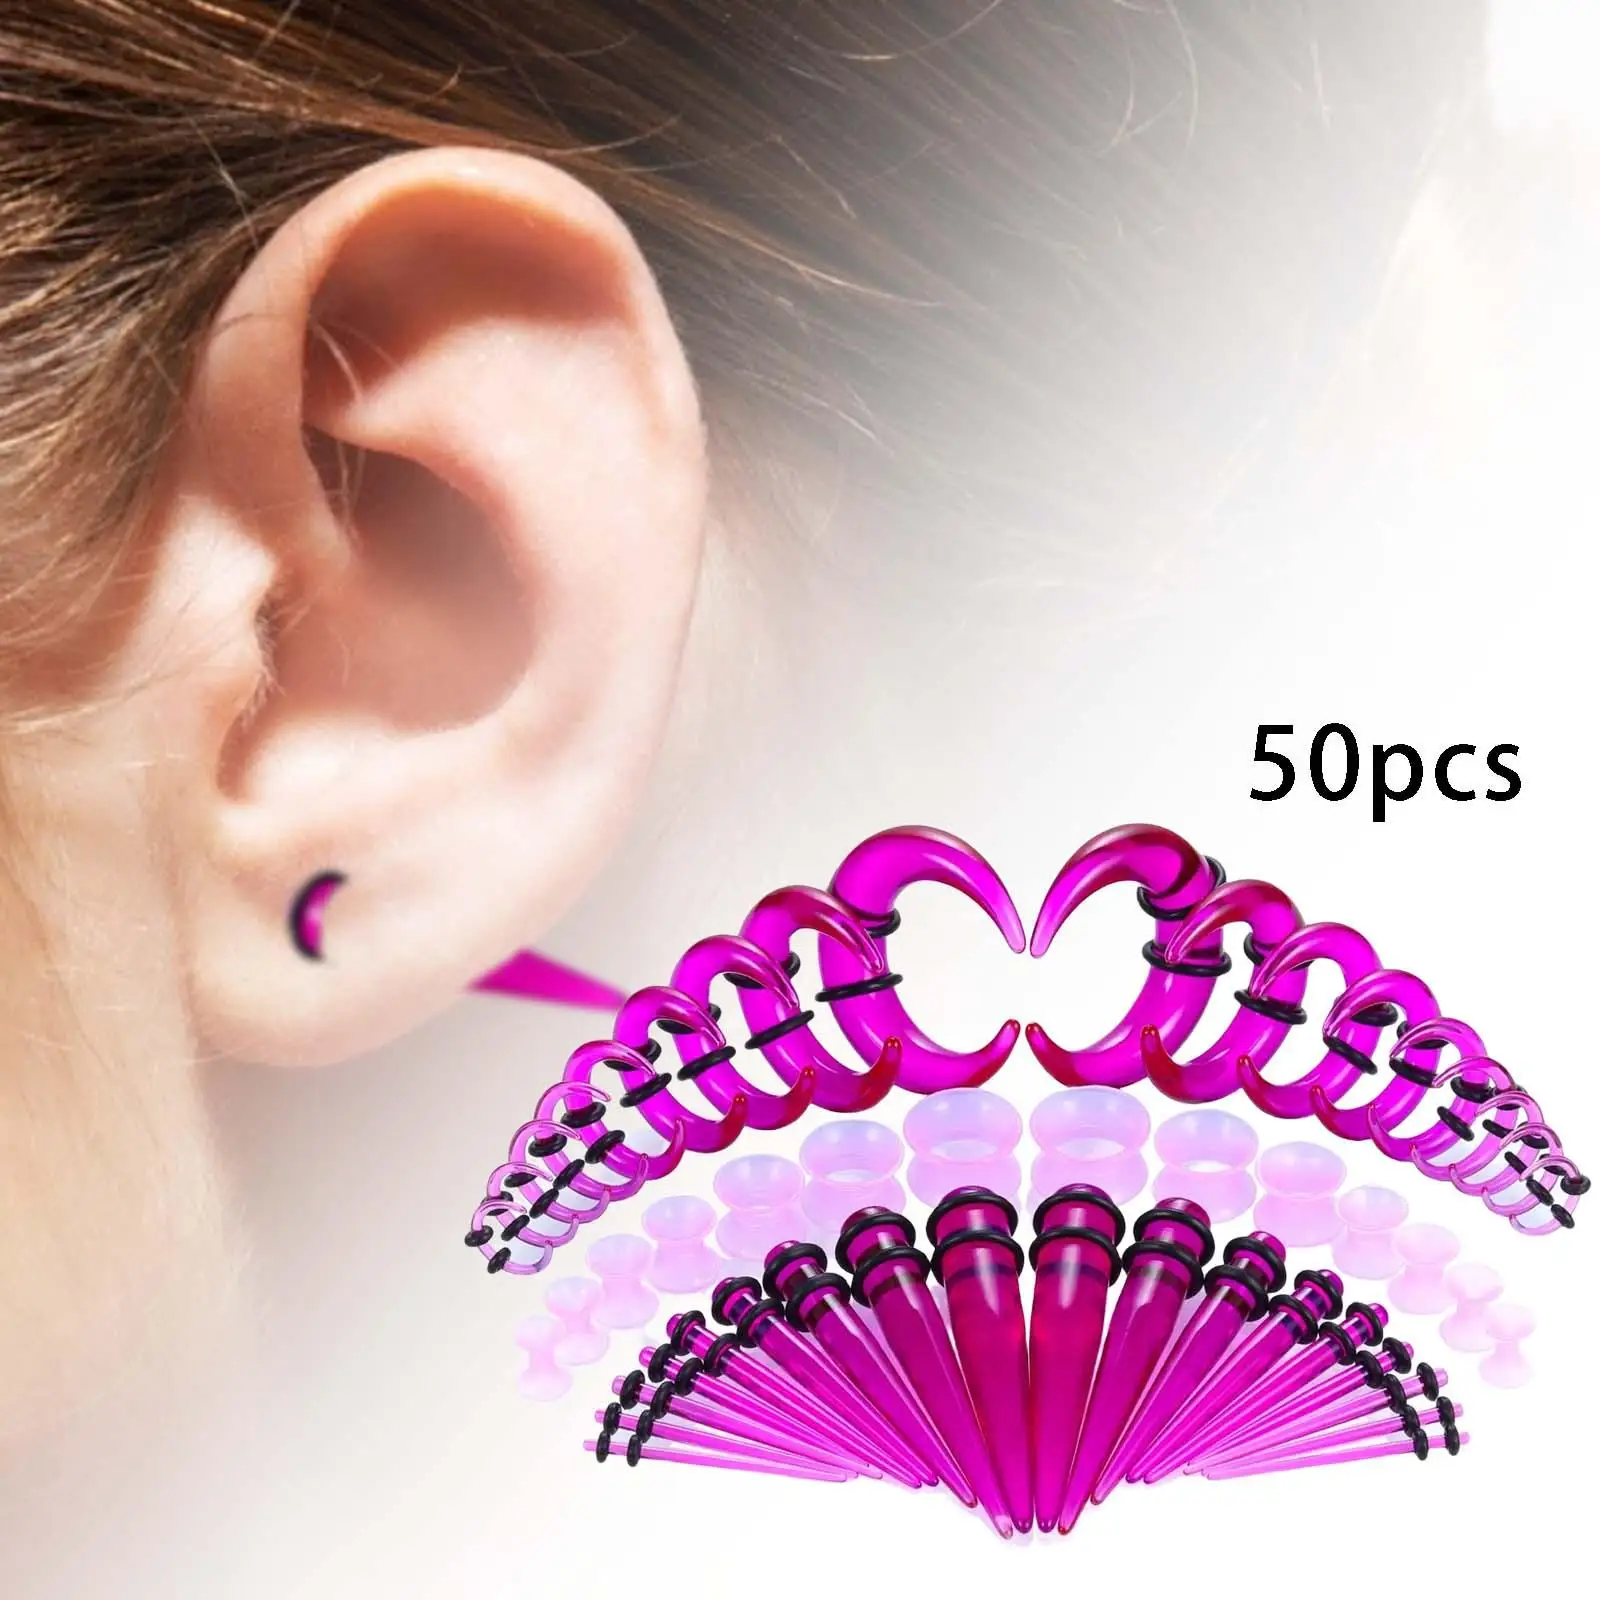 50Pcs Ear Gauge Stretching Kit Stretching Ear Stretchers Expanders Kit Ear Gauges Plugs Kit Expander Piercing Body Jewelry Adult